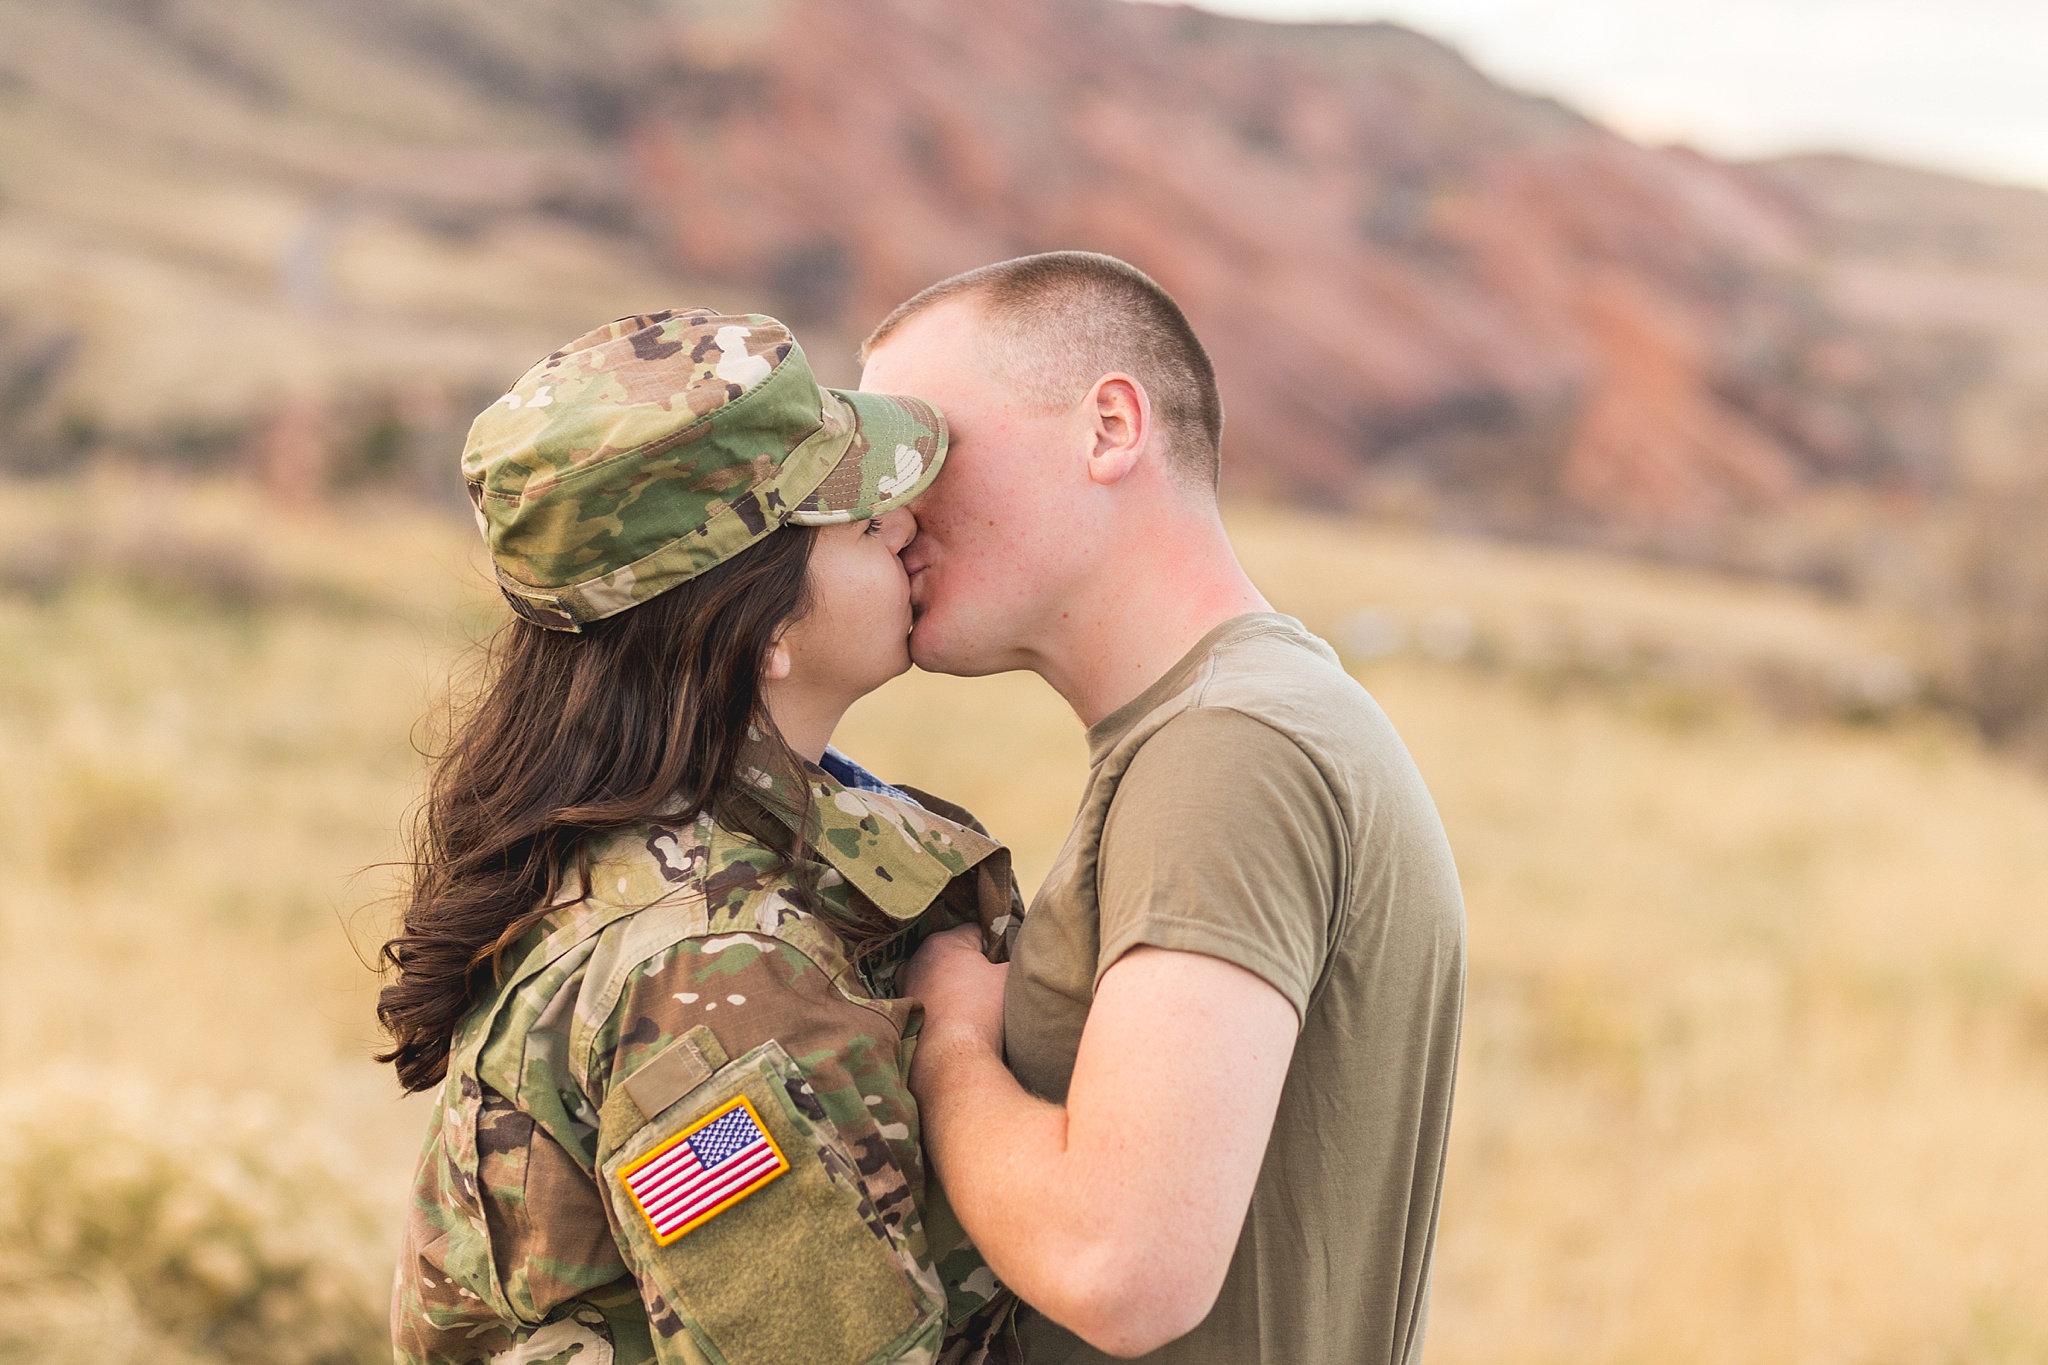 Tania & Chris' Mt. Falcon Engagement Session by Jennifer Garza Photography, Mt. Falcon Engagement Session, Mt. Falcon Engagement Photos, Morrison Engagement Photos, Red Rocks Engagement Photos, Colorado Engagement Photos, Colorado Engagement, Rocky Mountain Bride, Military Veteran, Military Engagement Photos